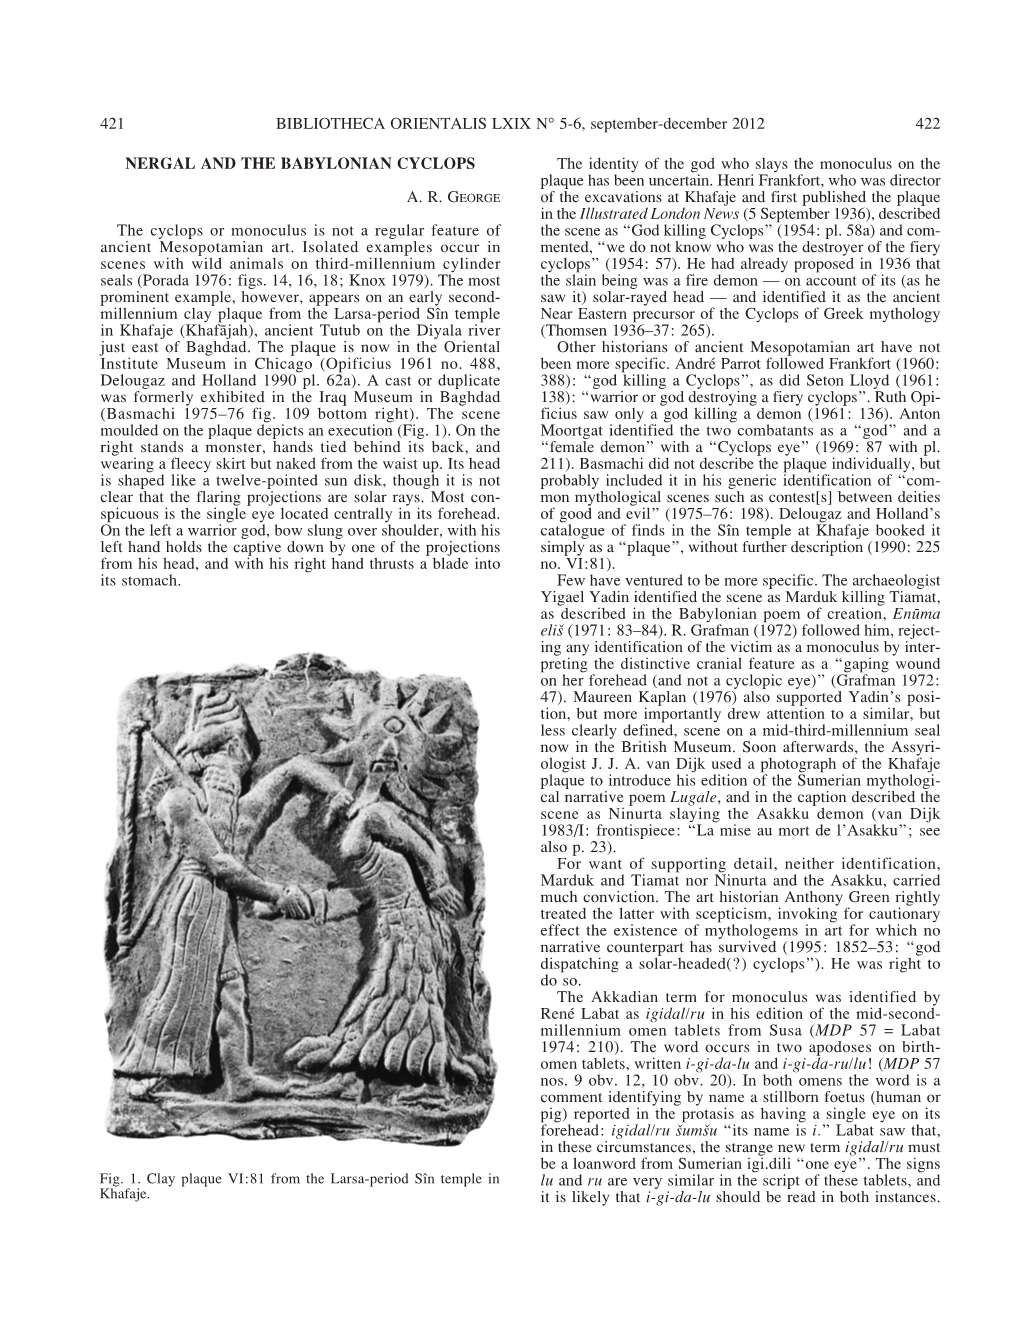 Nergal and the Babylonian Cyclops.Pdf